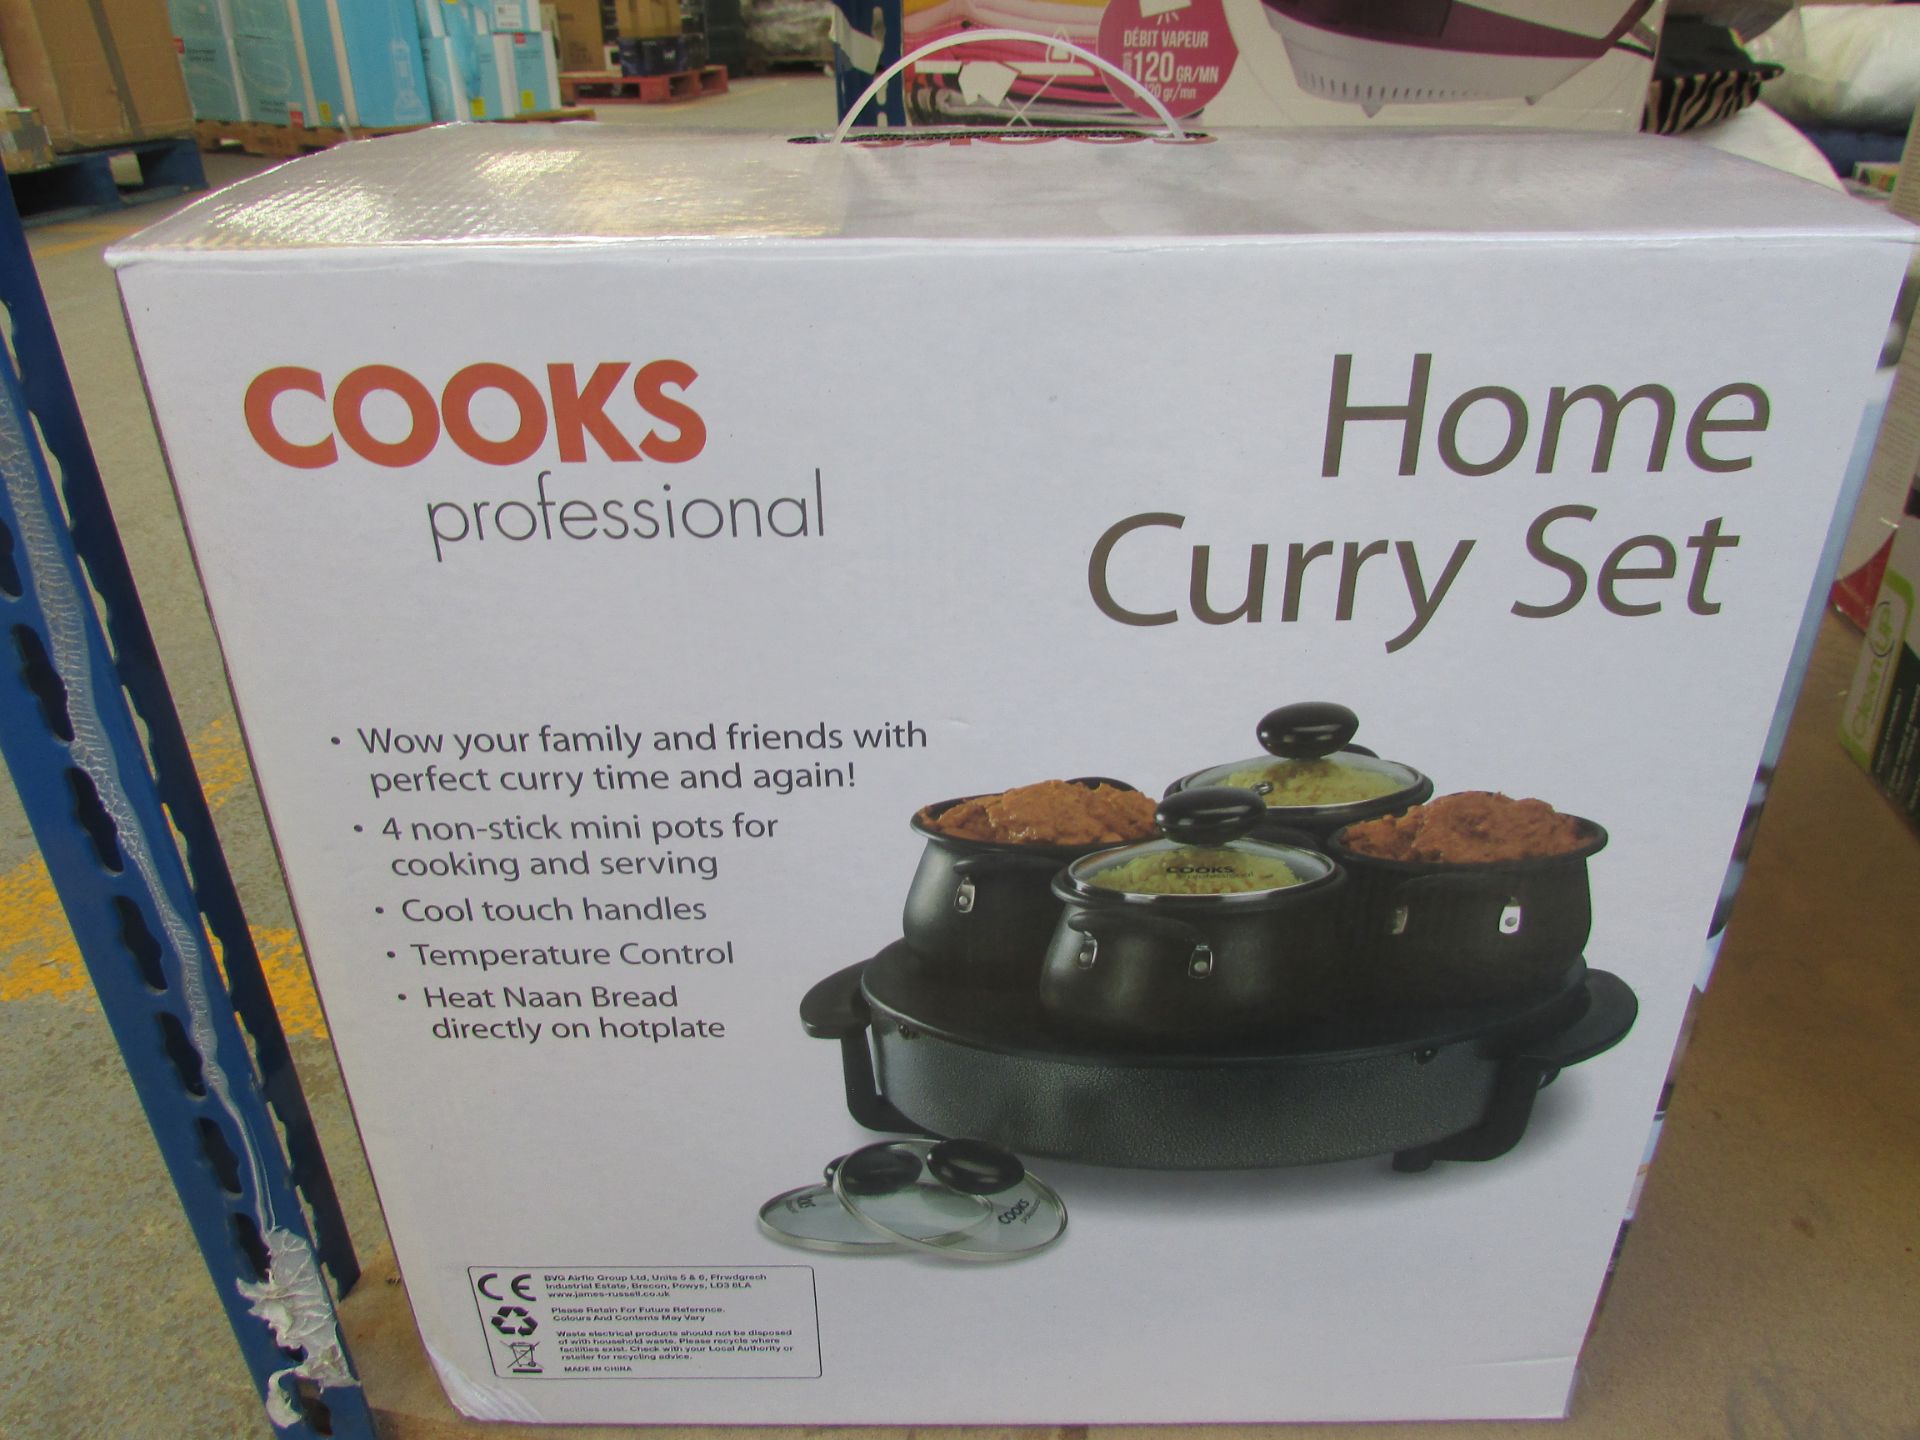 Cooks Professional Home Curry Set